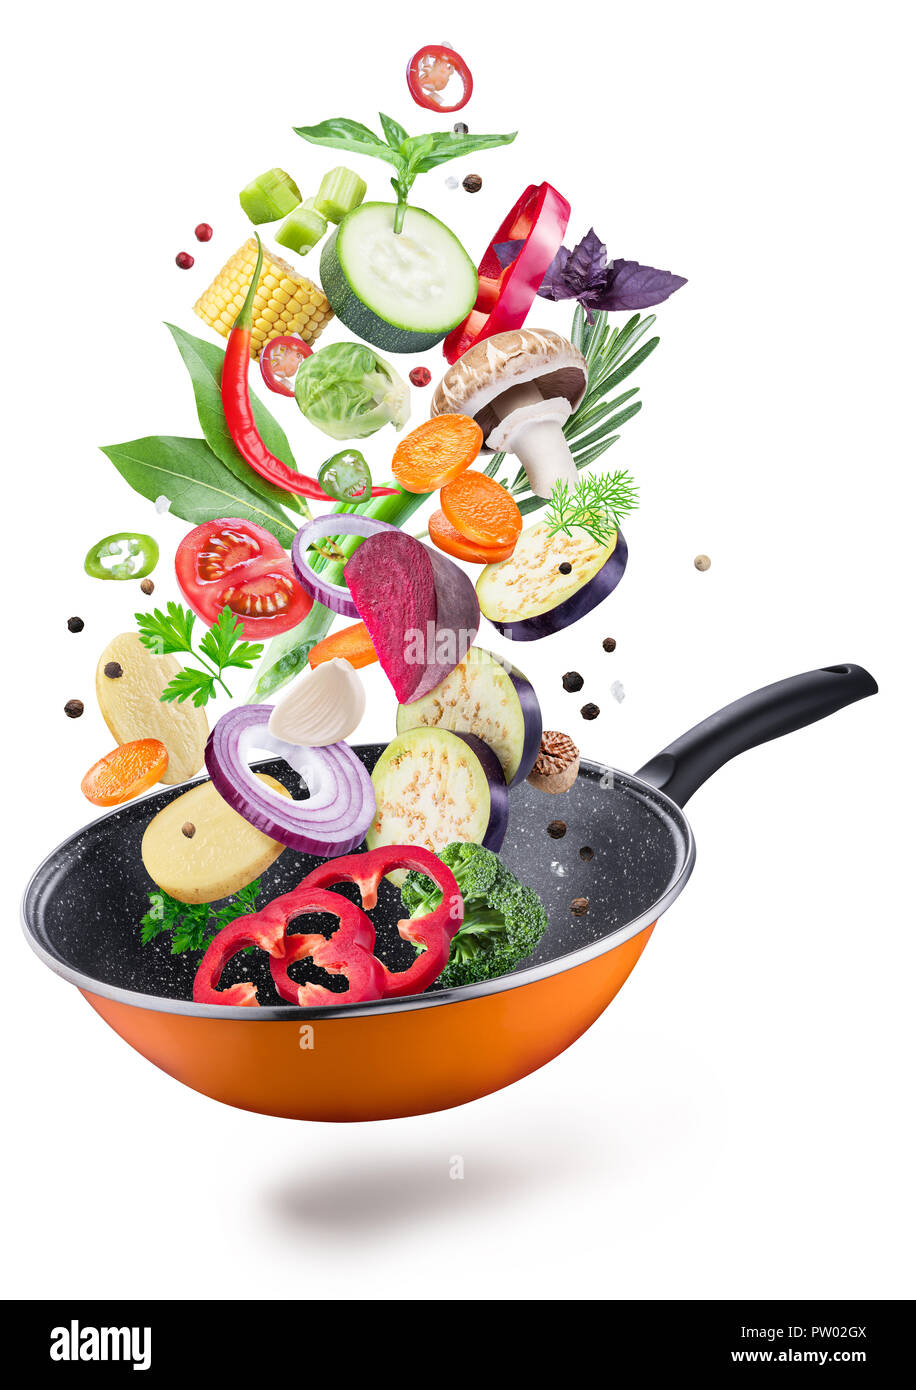 Flying fresh vegetables and spices over a pan. File contains clipping path. Flying motion effect. Stock Photo